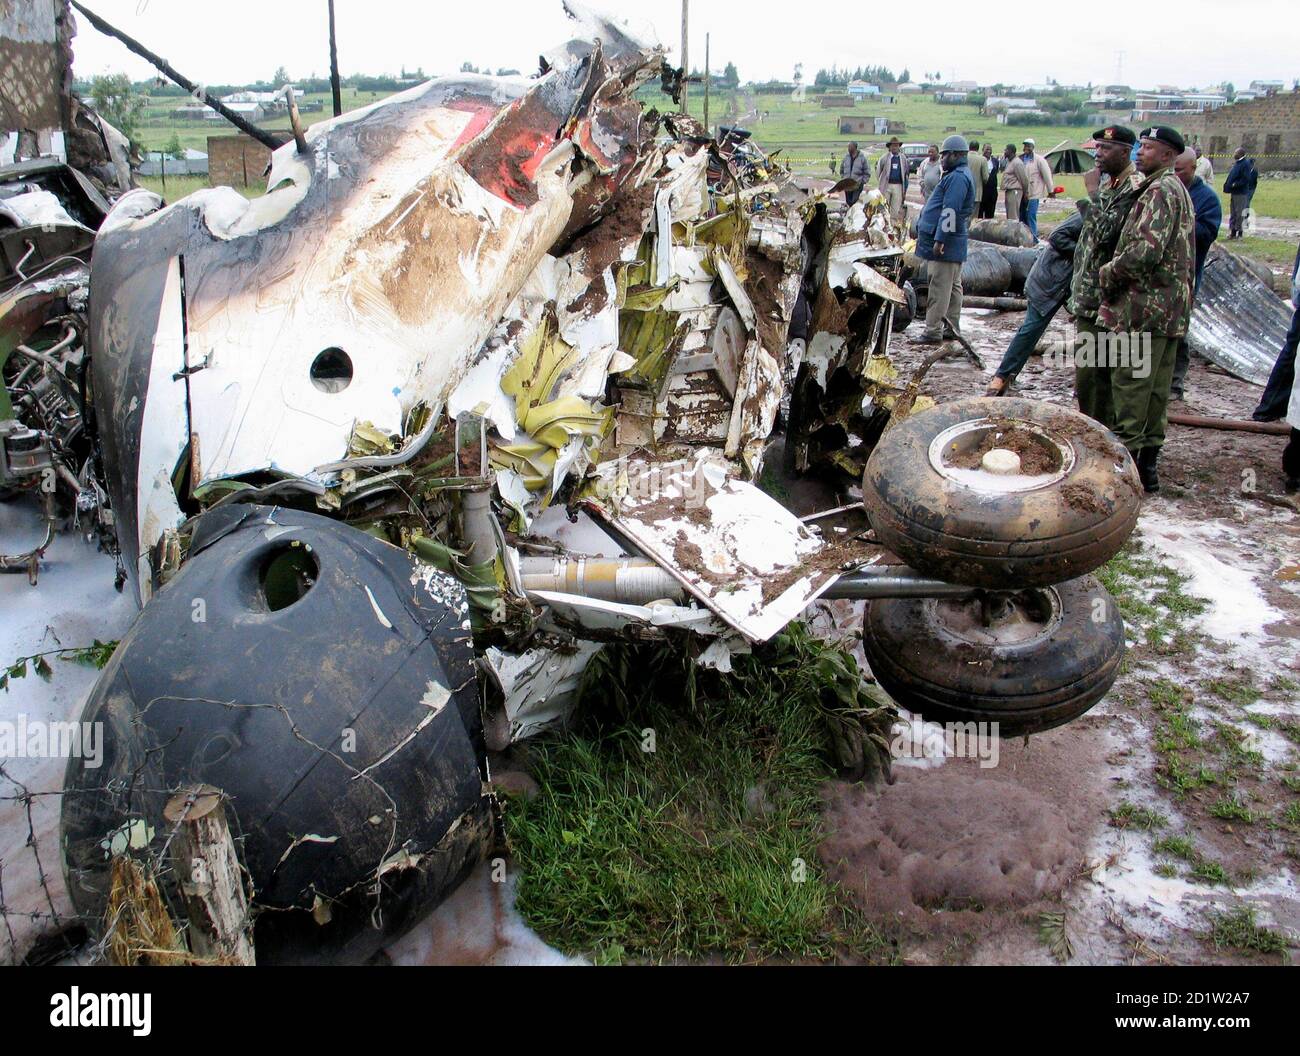 Policemen and emergency workers look at the wreckage of a twin-engine Buffalo plane that crashed in Ruai, the outskirts of Kenya's capital Nairobi, December 30, 2006. A Kenyan plane carrying relief supplies and fuel to neighbouring war-torn Somalia crashed and burst into flames on Saturday, but officials said there were no fatalities. REUTERS/Thomas Mukoya (KENYA) Stock Photo